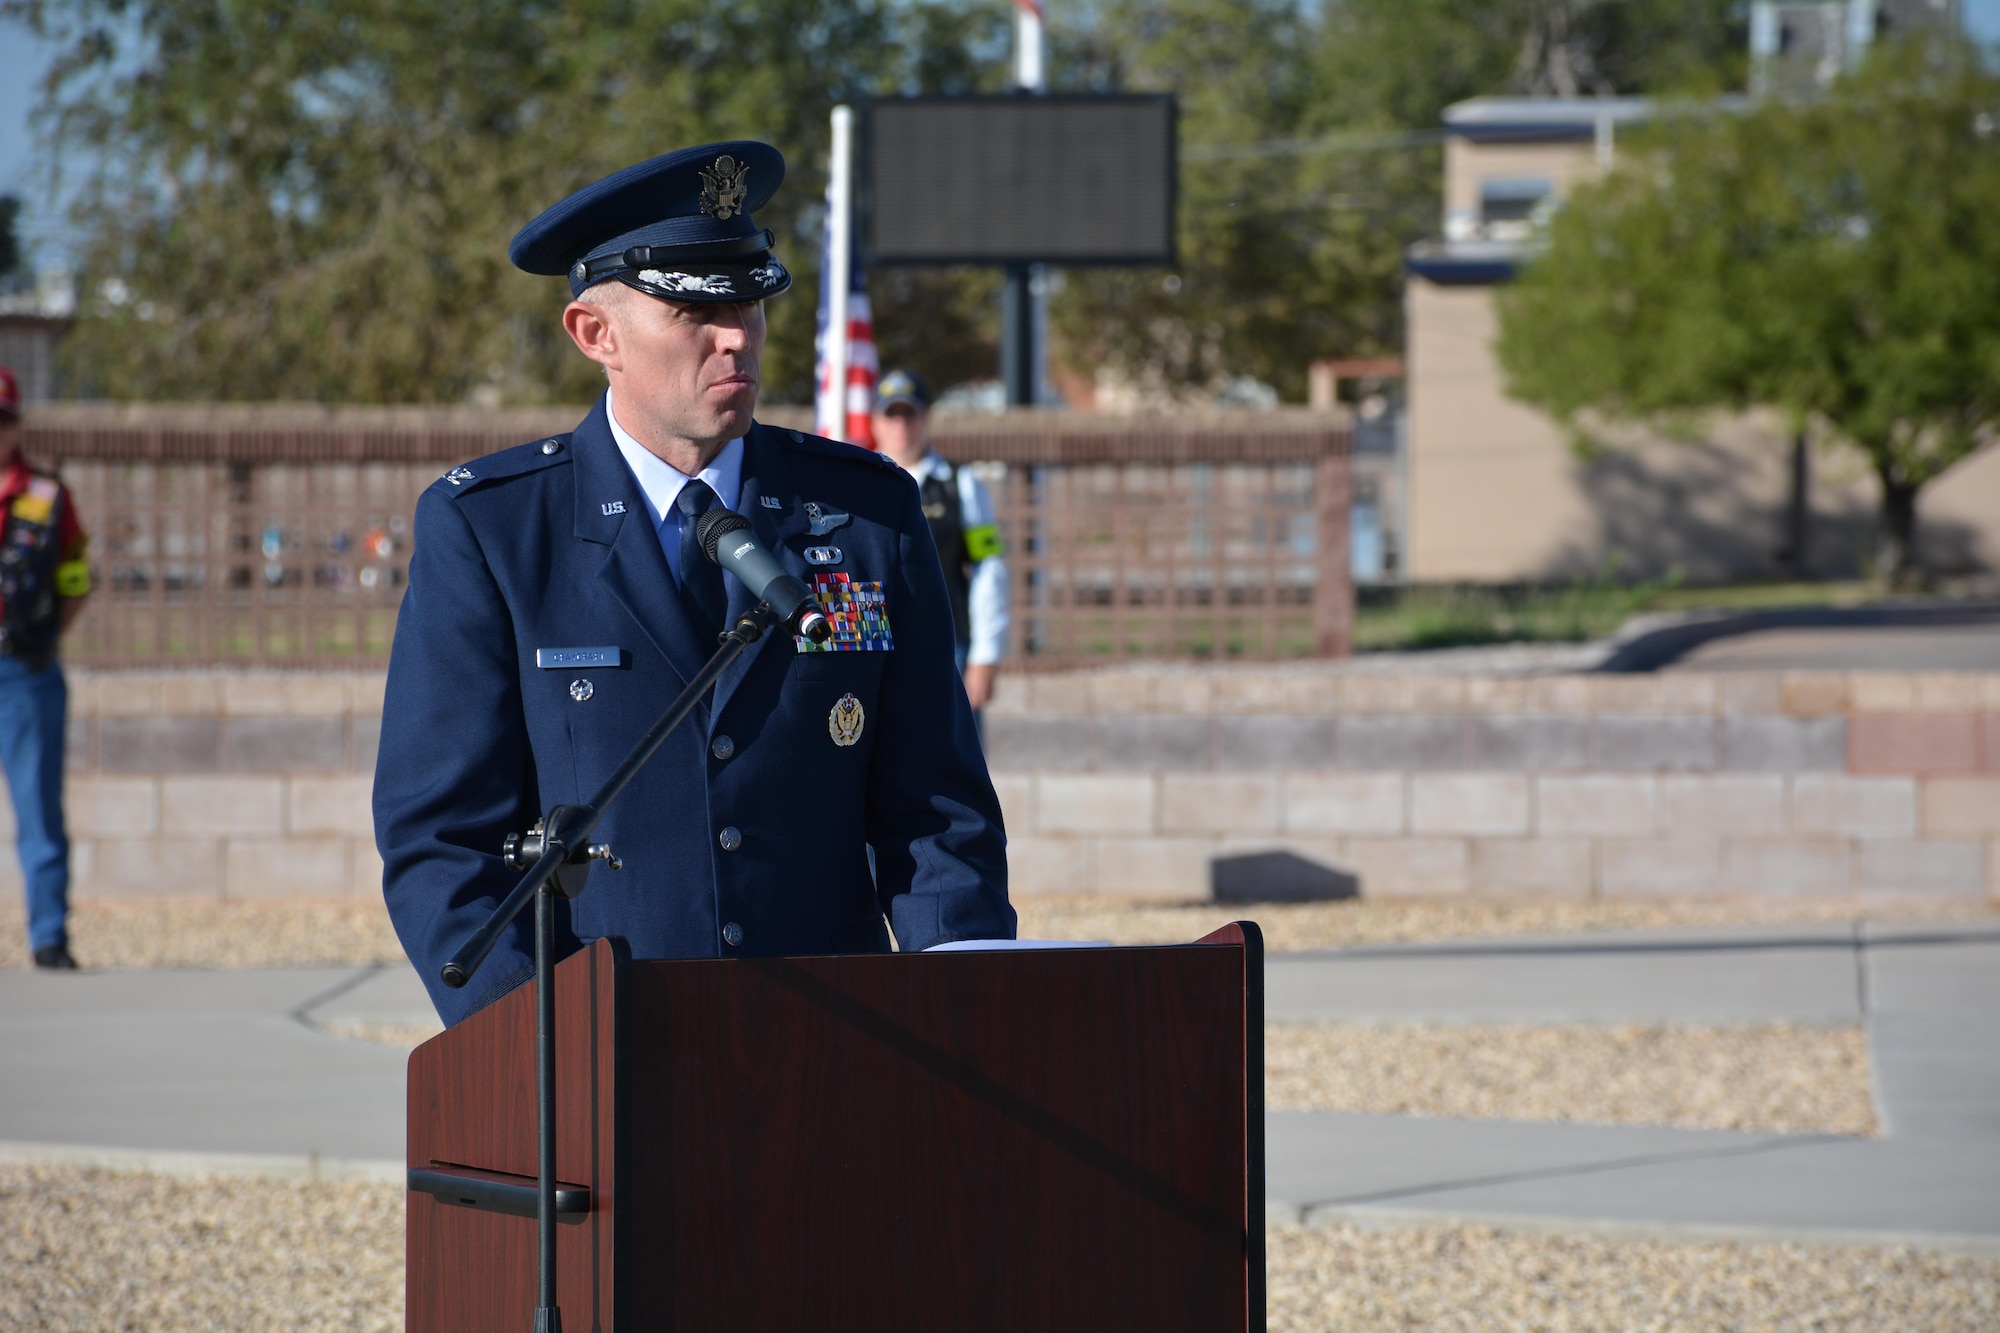 Colonel Ryan Craycraft, the 49th Wing vice commander, speaks at the POW/MIA remembrance ceremony at Holloman Air Force Base, N.M., on Sept. 16, 2016. The ceremony, which was in remembrance of prisoners of war and those still missing in action, were part of Holloman’s POW/MIA commemoration. (U.S. Air Force photo by Staff Sgt. Warren Spearman)